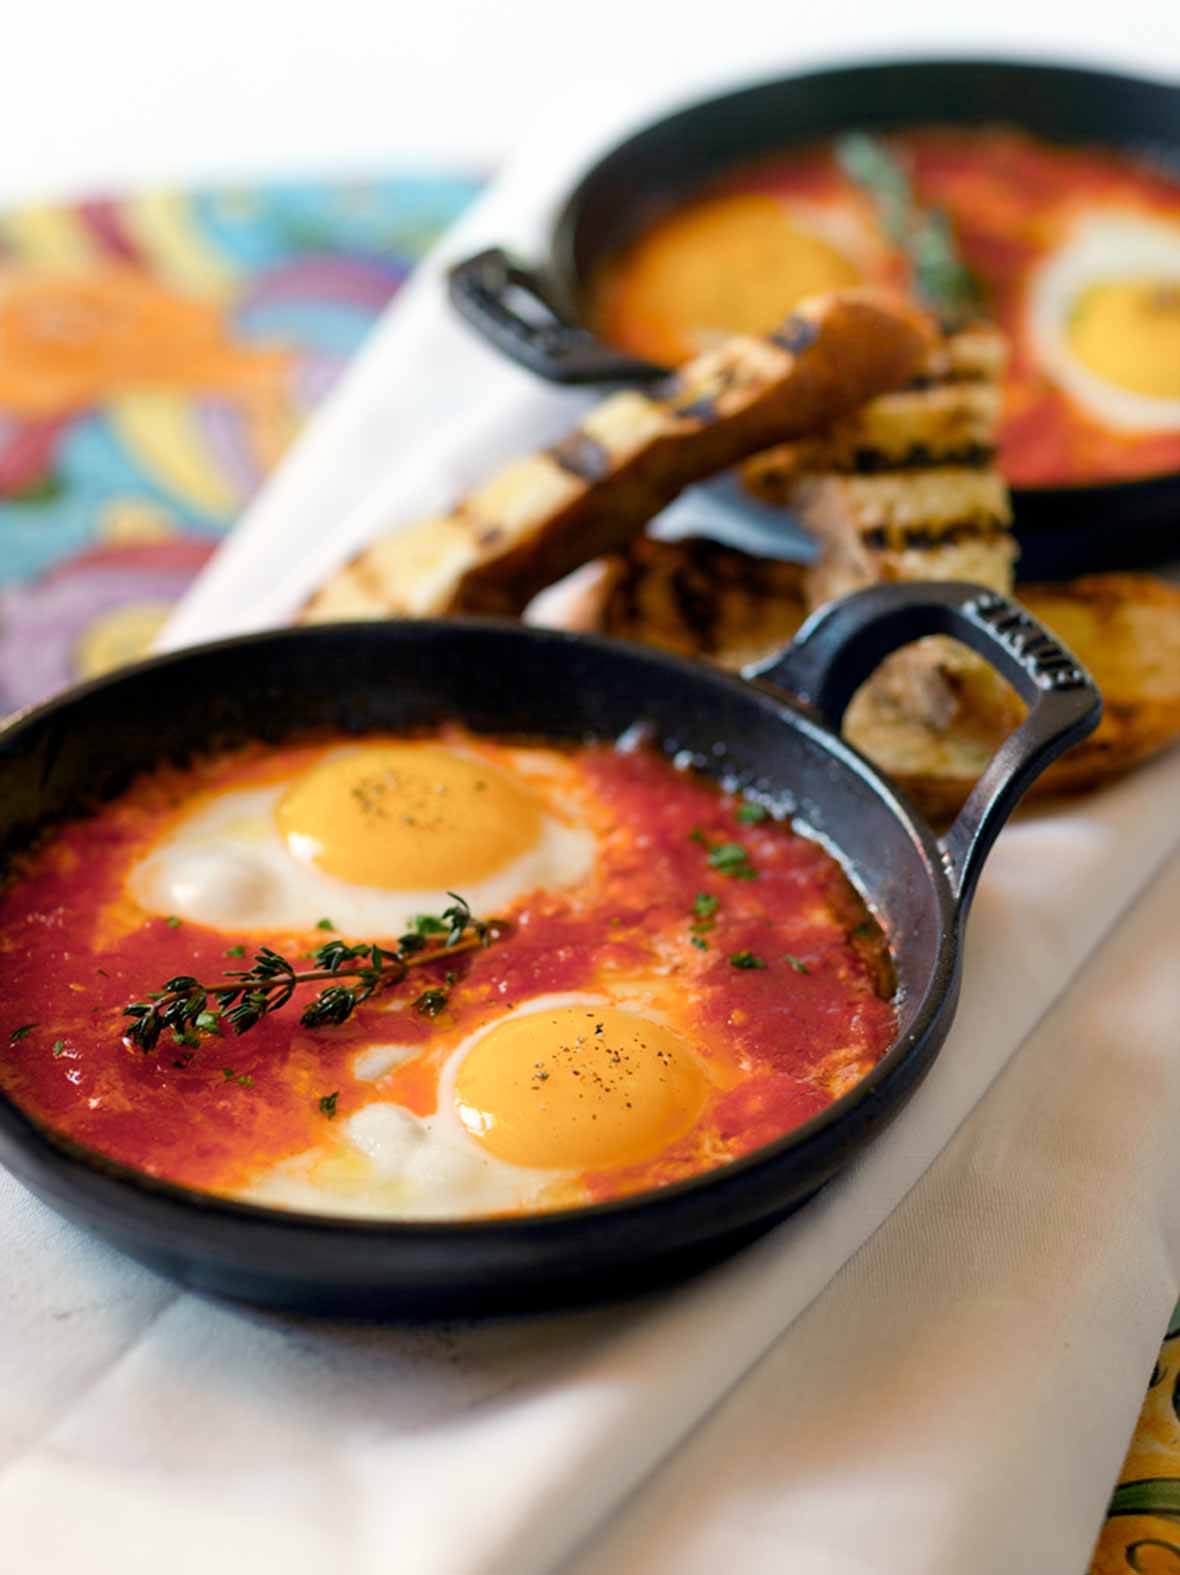 Two eggs in a tomato sauce, topped with a sprig of thyme in a cast iron skillet.